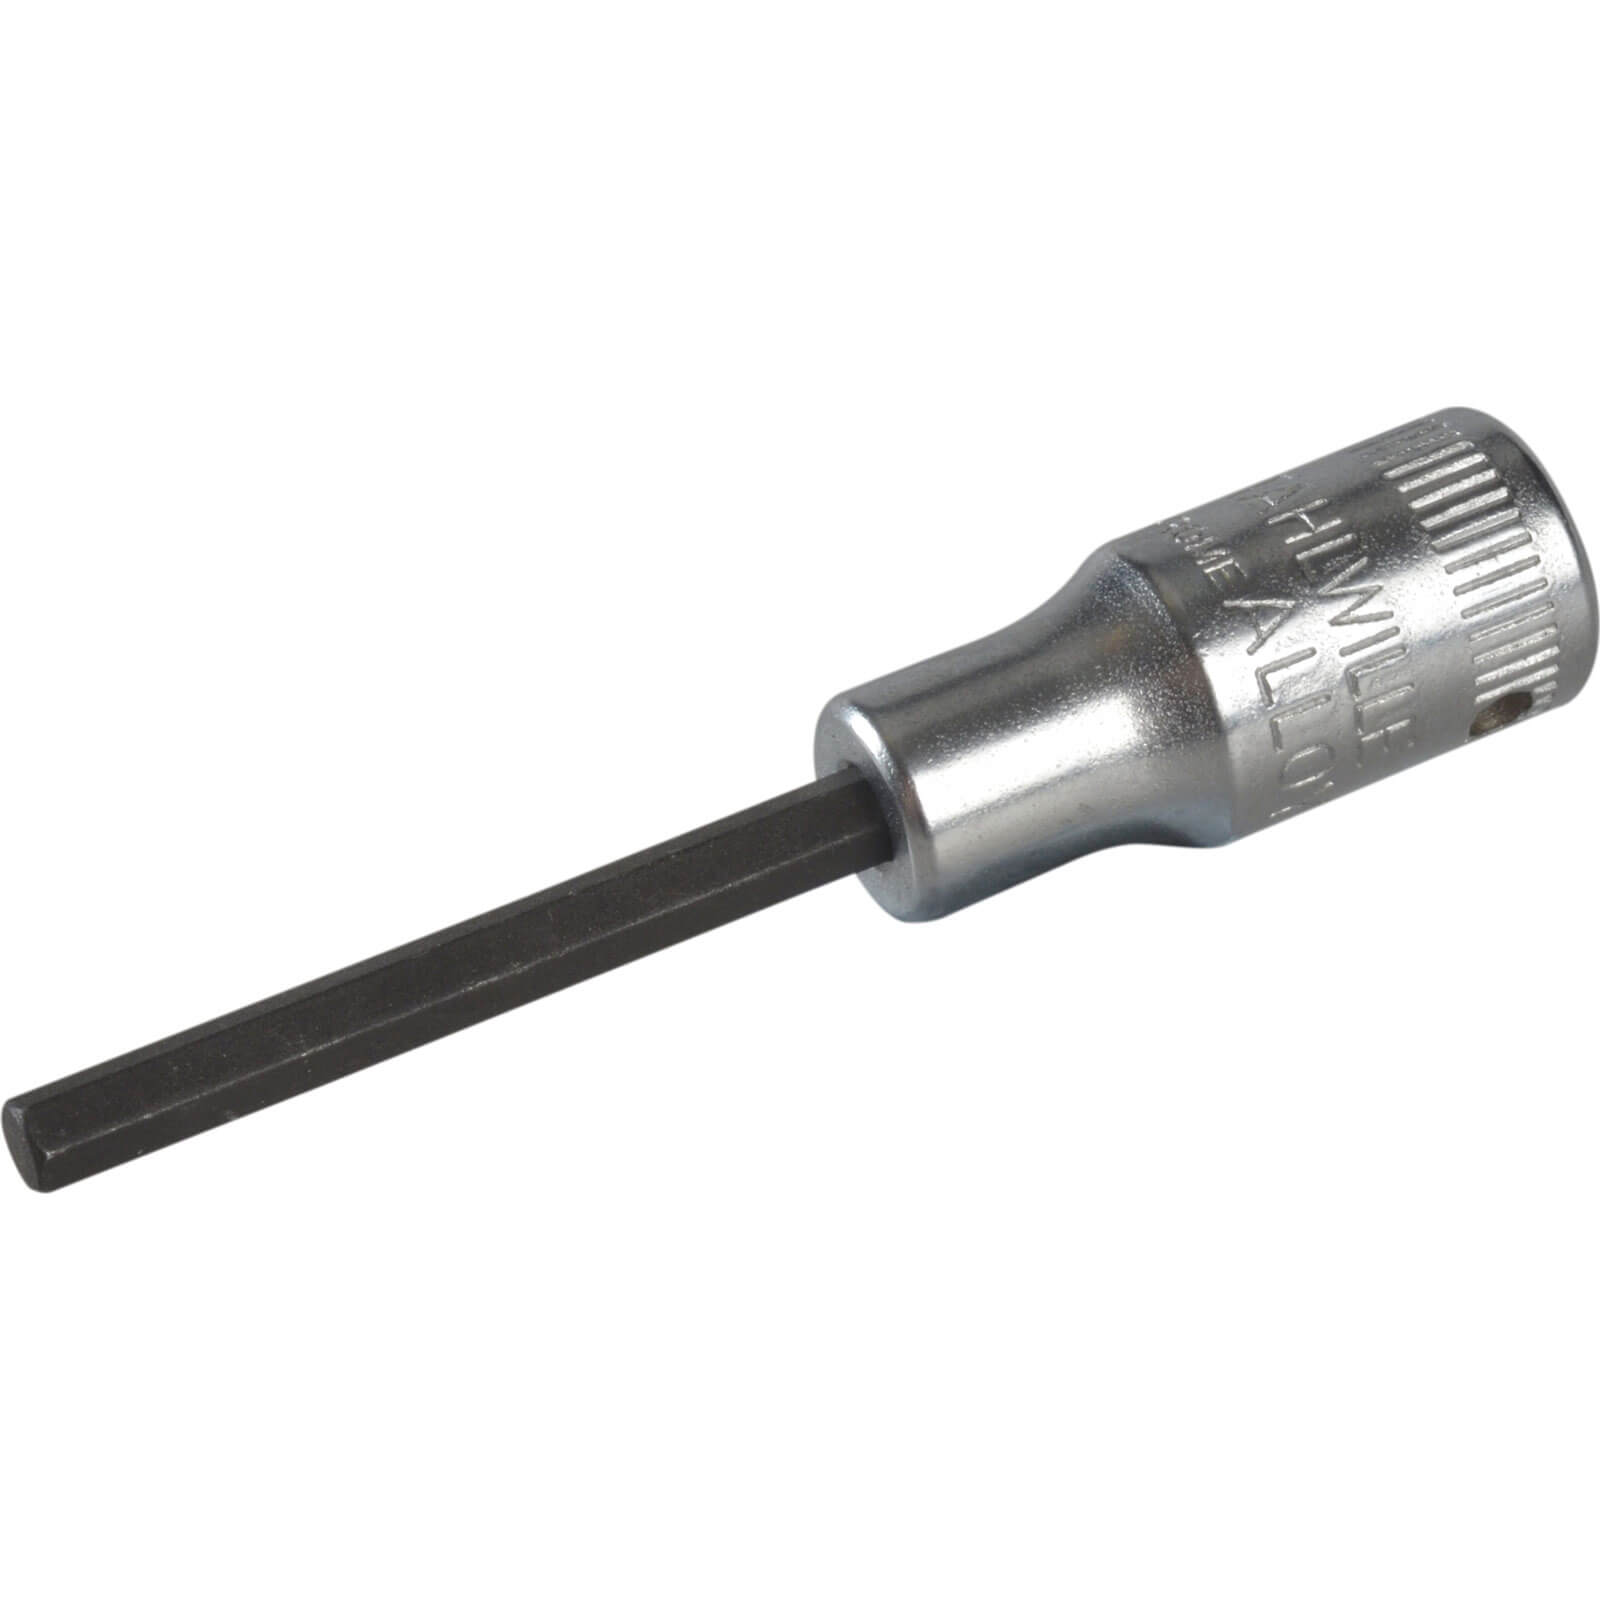 Image of Stahlwille 1/4" Drive Hexagon Socket Bit Imperial 1/4" 3/32"